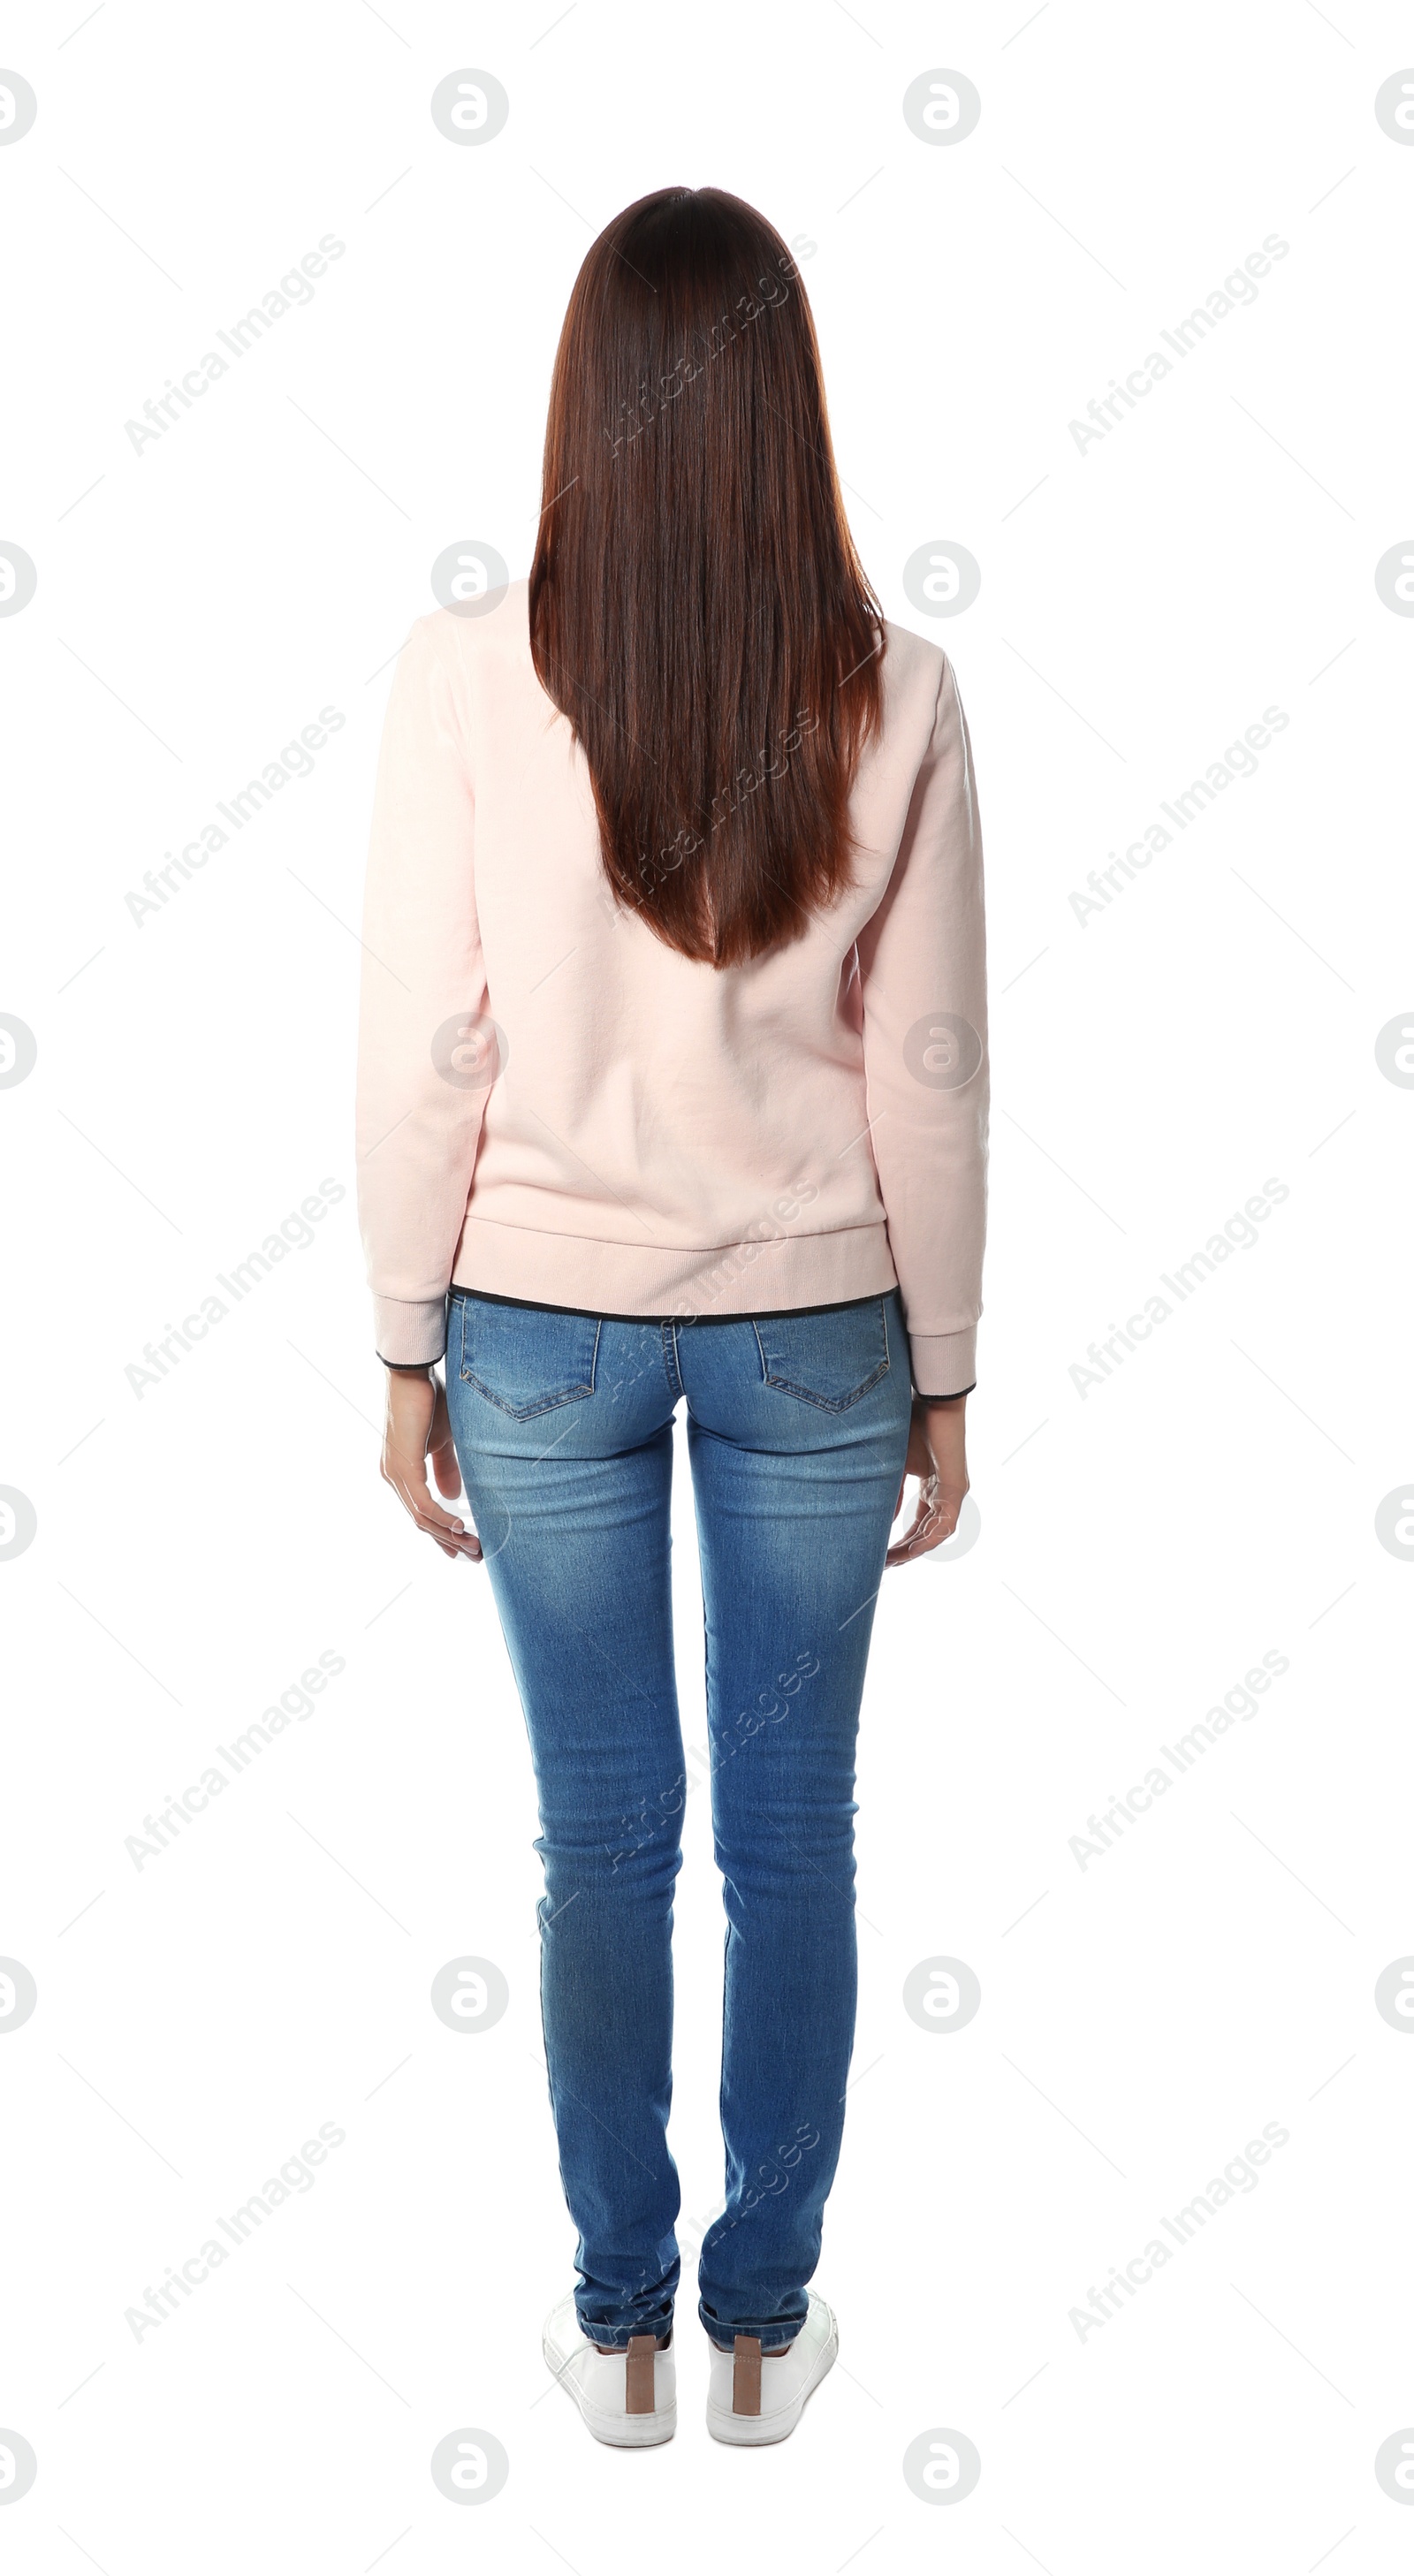 Photo of Brunette woman with long hair posing on white background